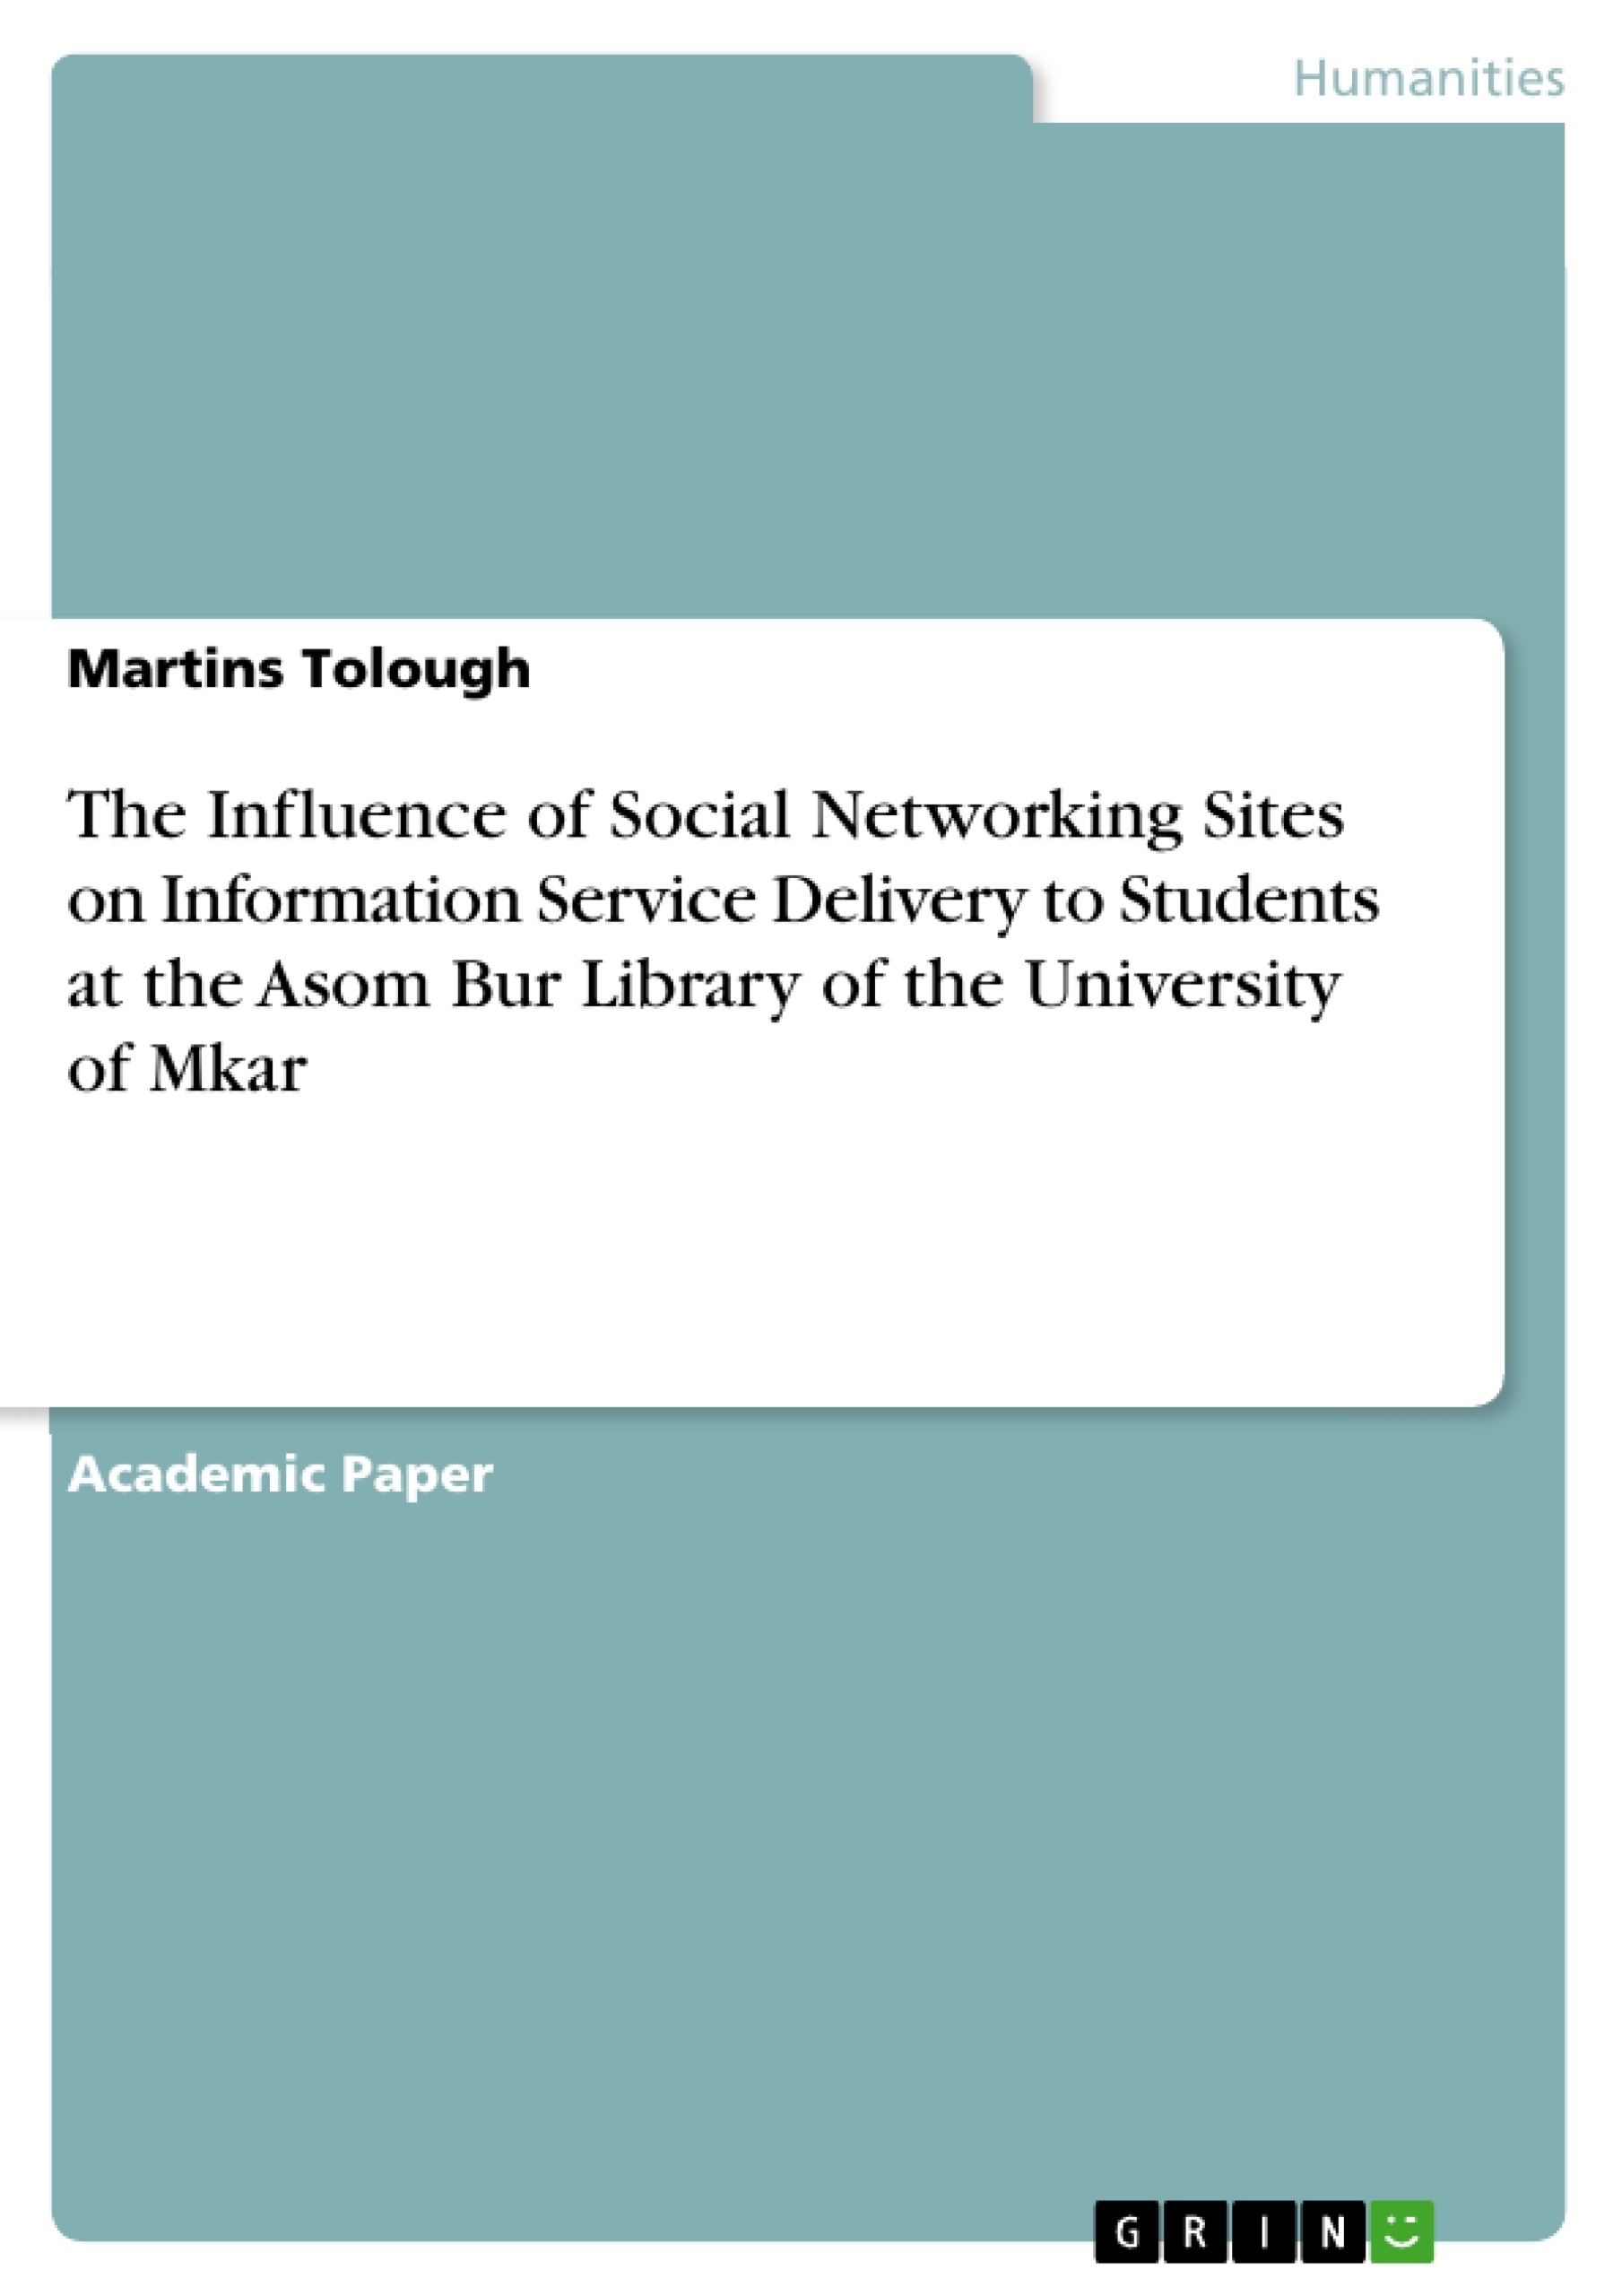 Title: The Influence of Social Networking Sites on Information Service Delivery to Students at the Asom Bur Library of the University of Mkar